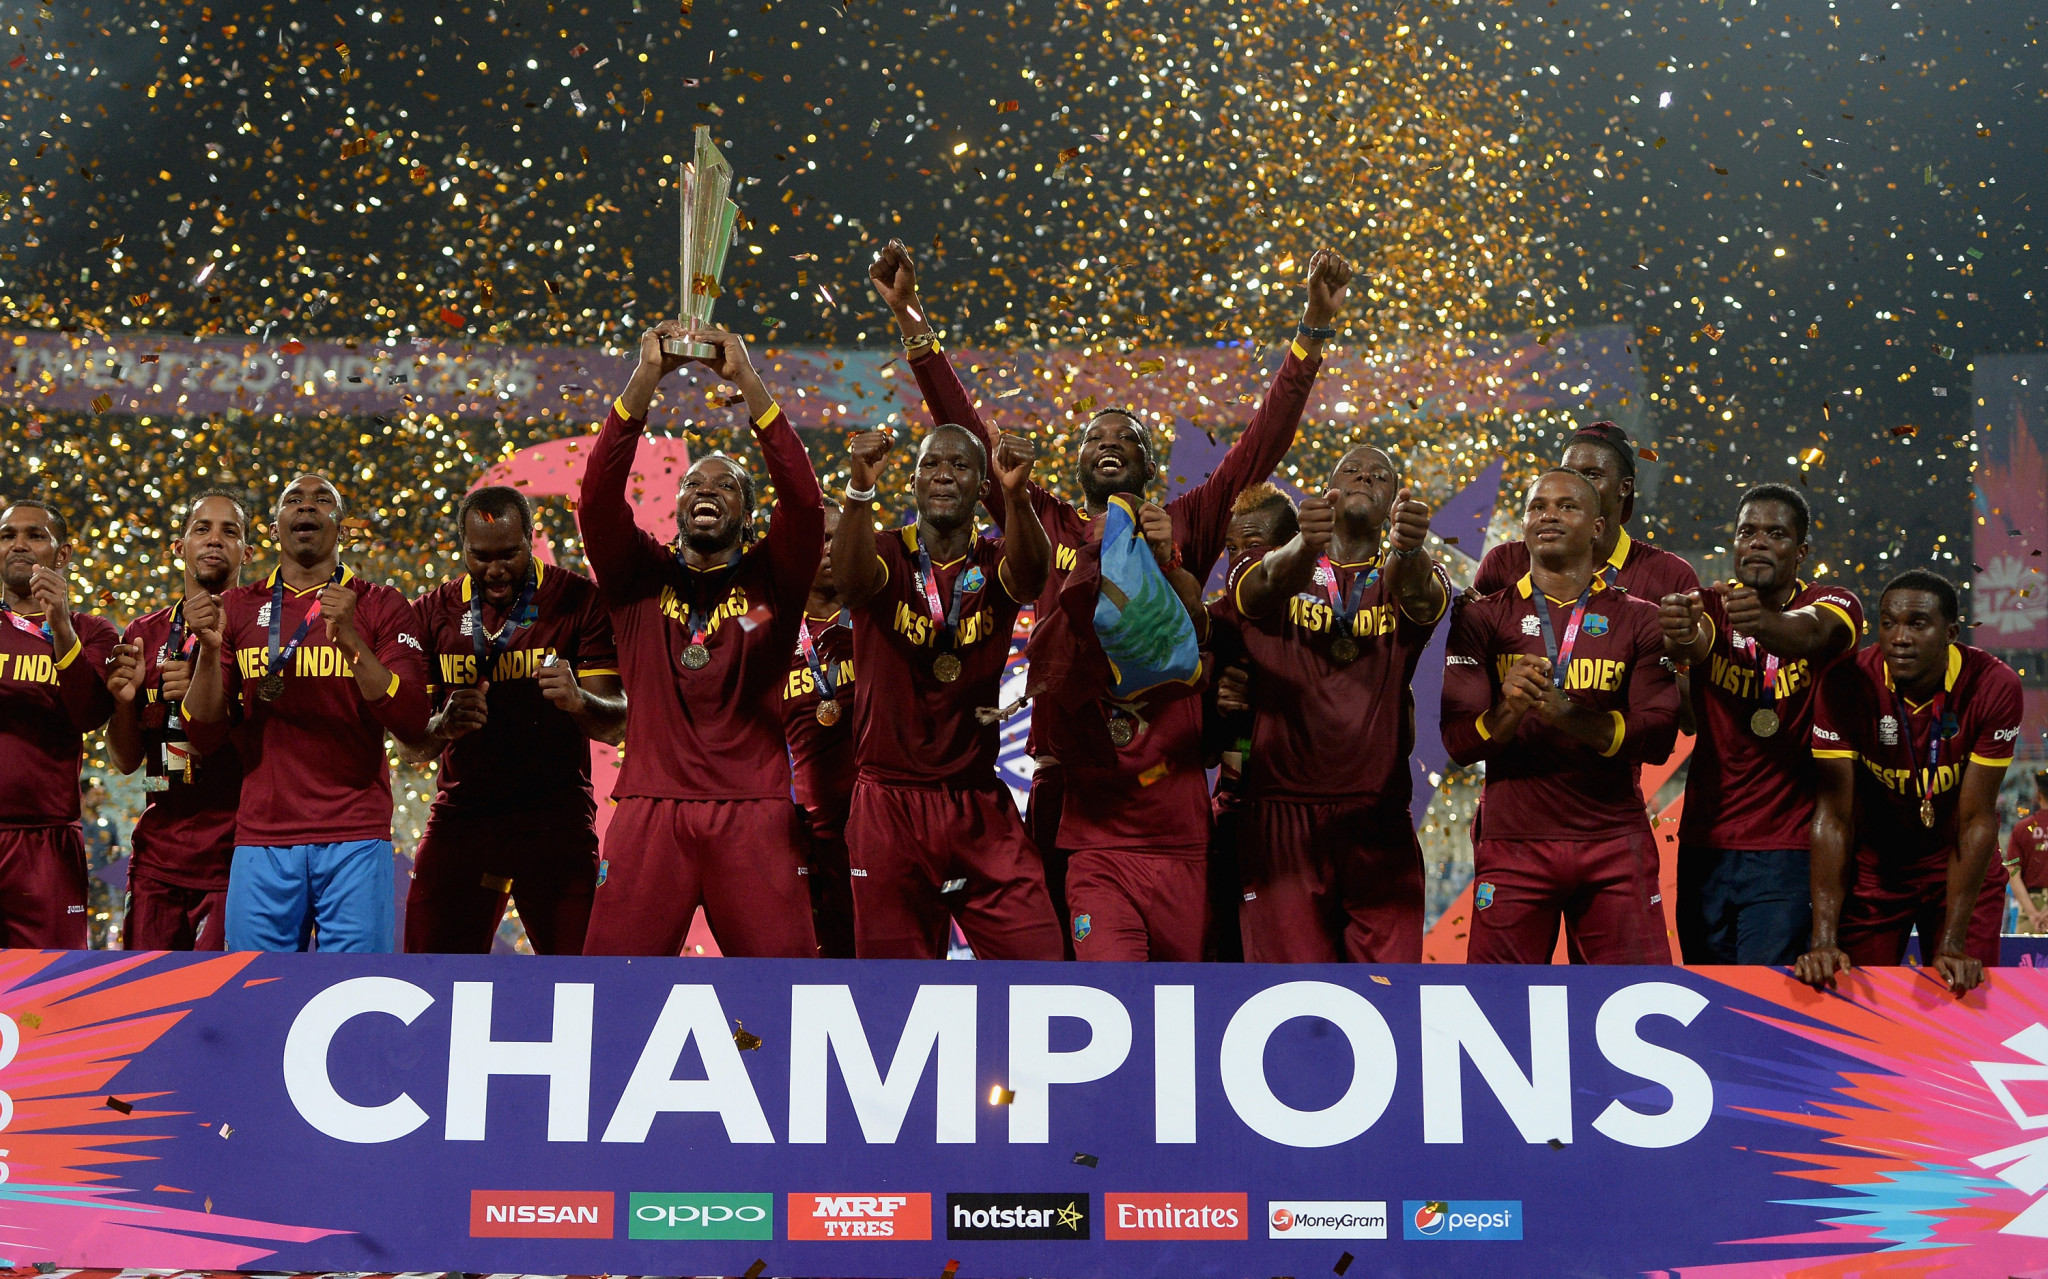 West Indies are set to face England in a repeat of the 2016 final on the opening day of Super12 action at the ICC Men's T20 World Cup 2021 ©Getty Images